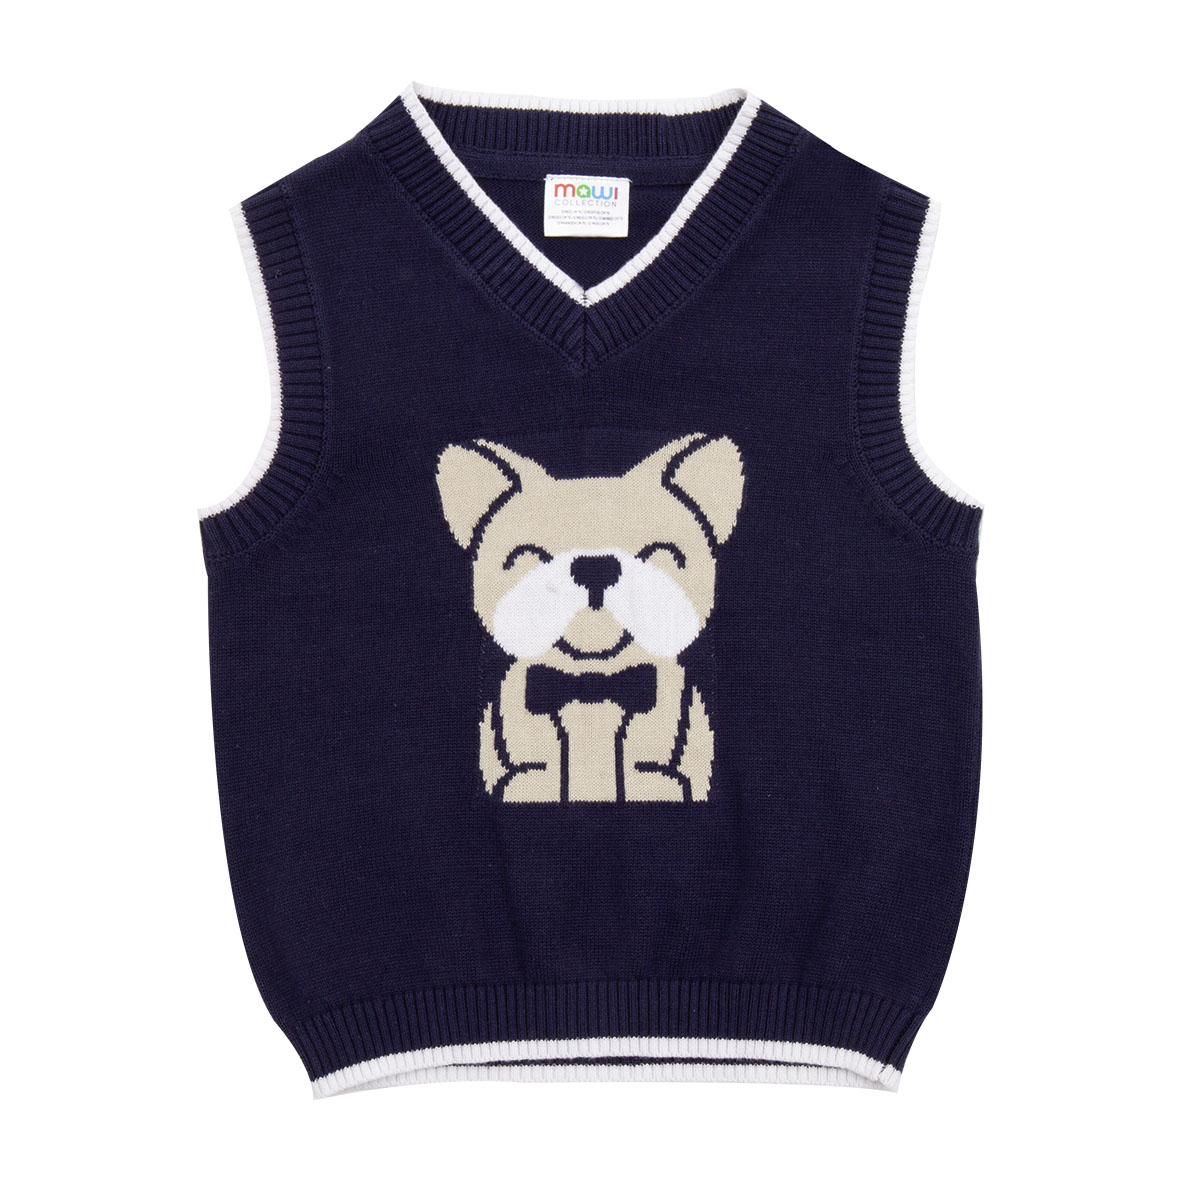 Mawi gilet tricot cagnolino - Mawi